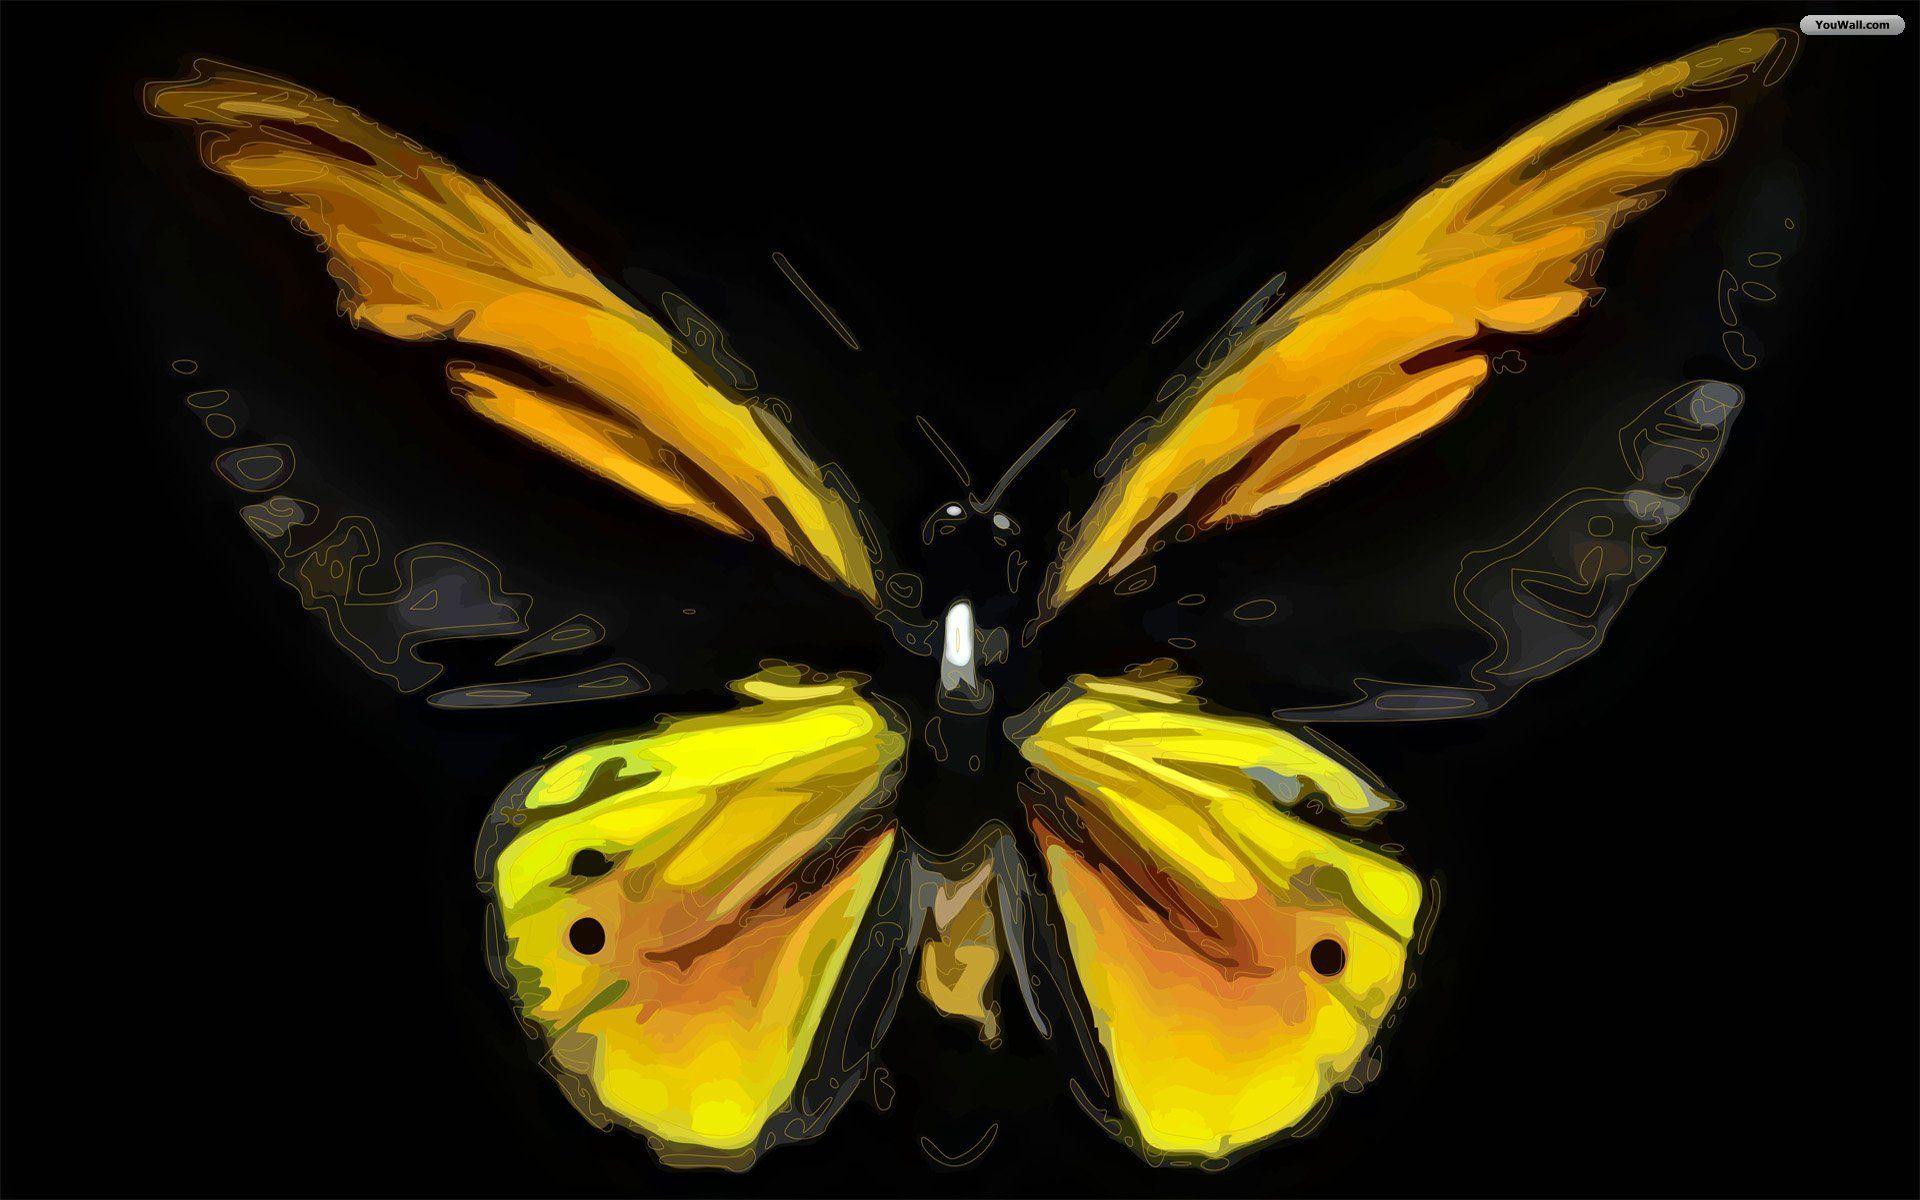 Butterfly Wallpaper. Piccry.com: Picture Idea Gallery